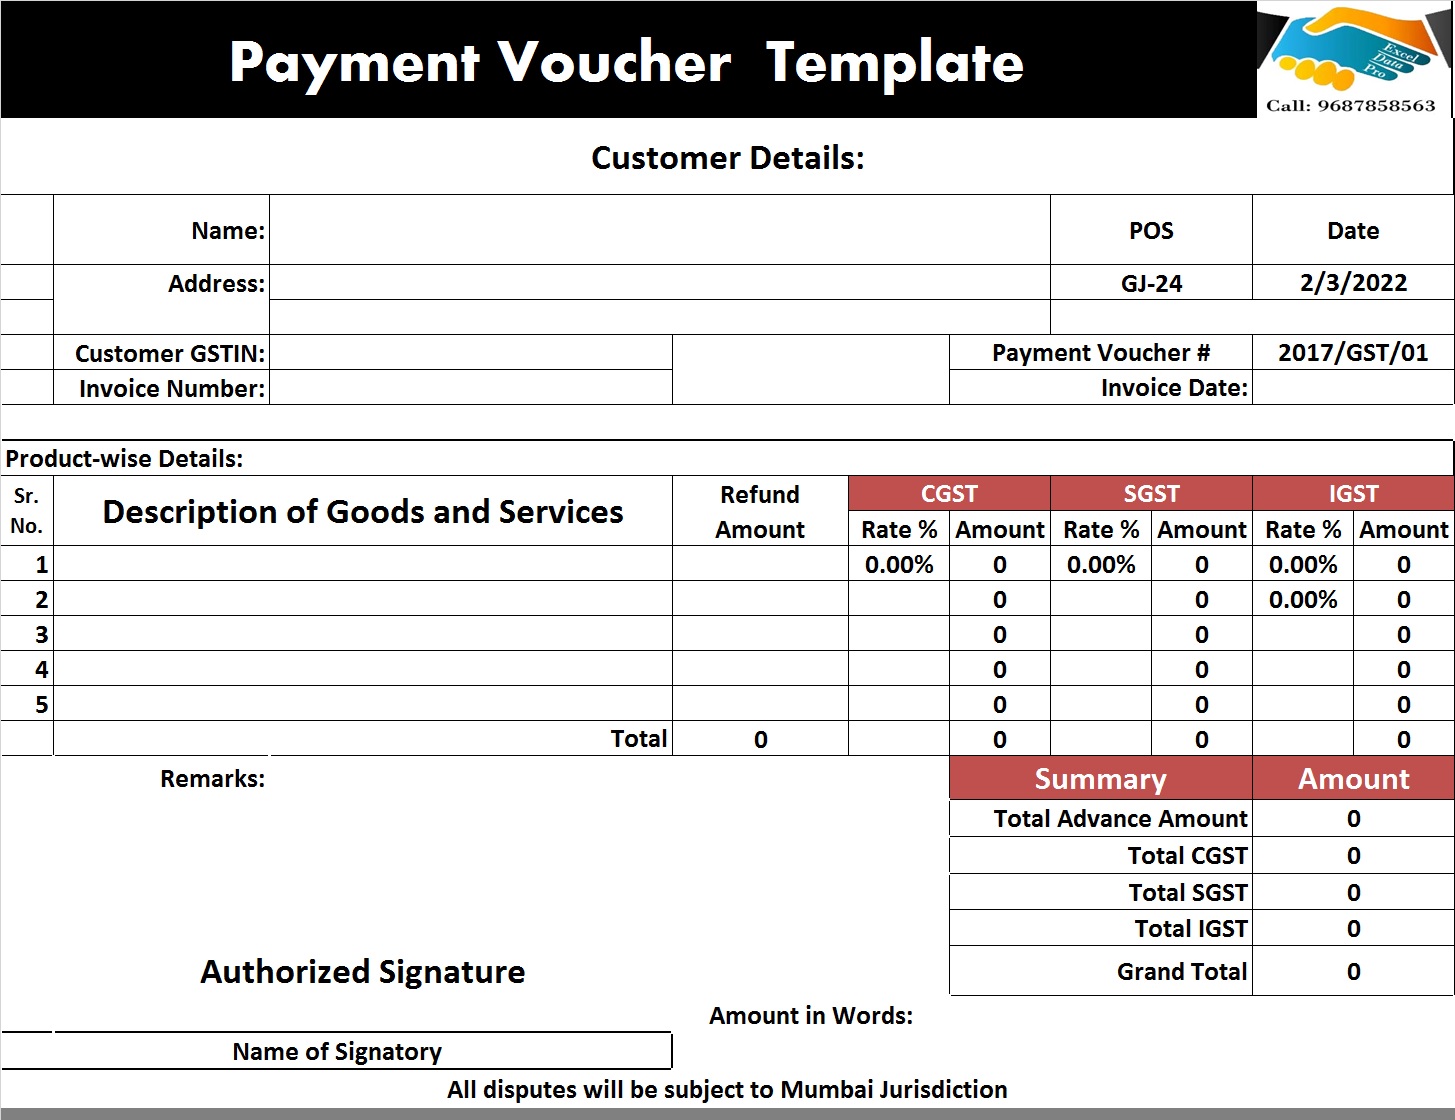 Payment Voucher Template Excel Free - Printable Templates